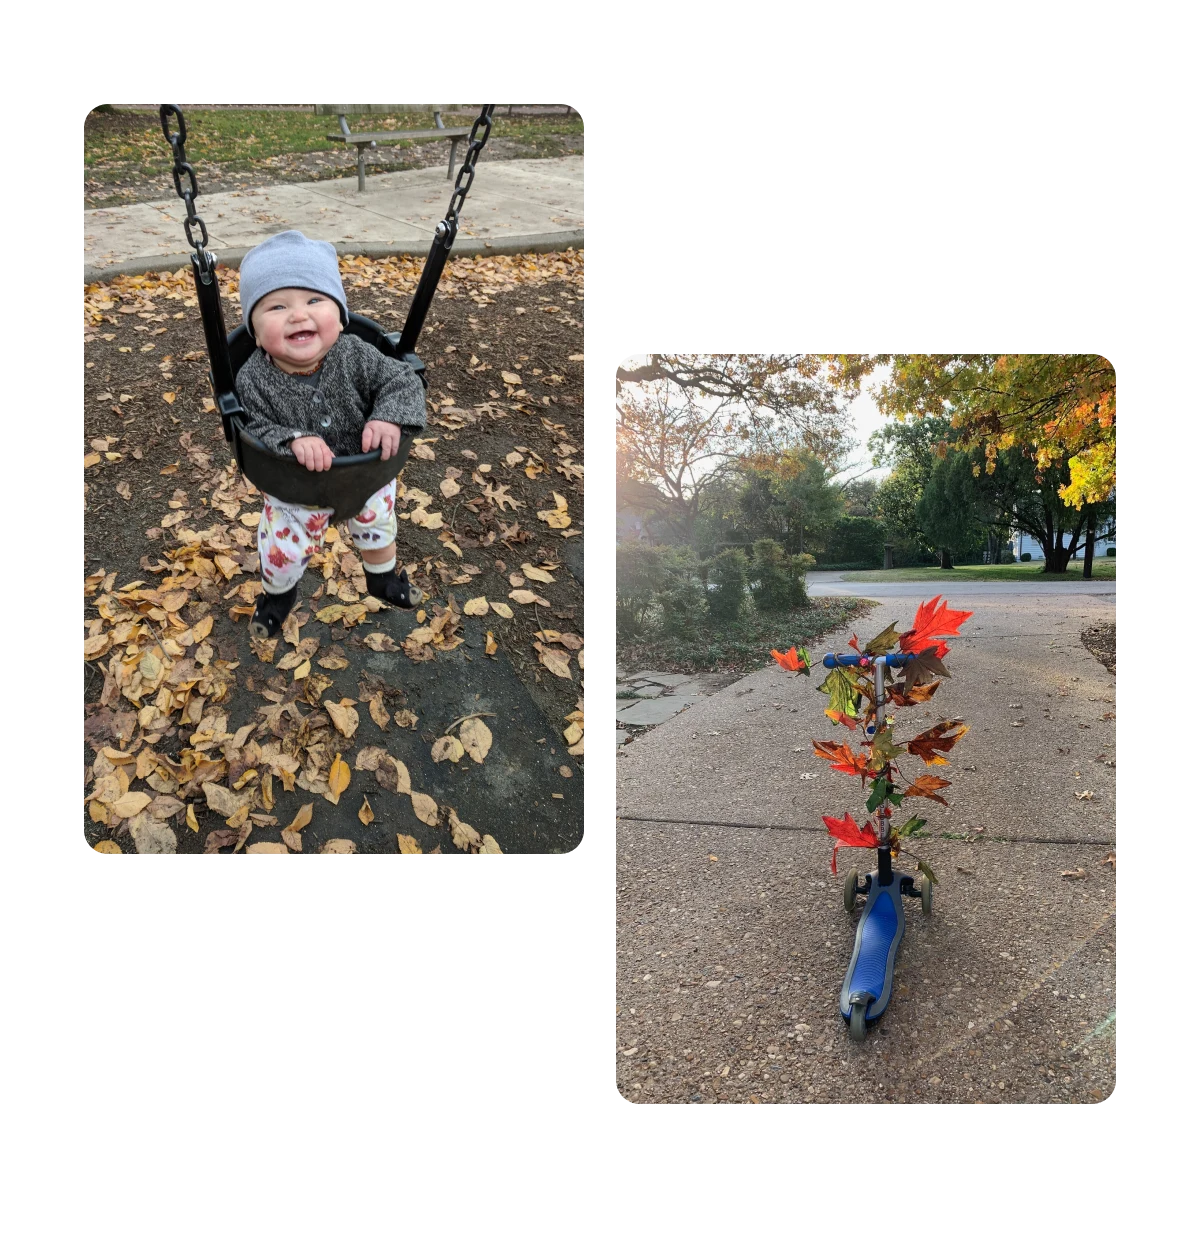 Two pins, baby in swing set, kid scooter with fall leaves